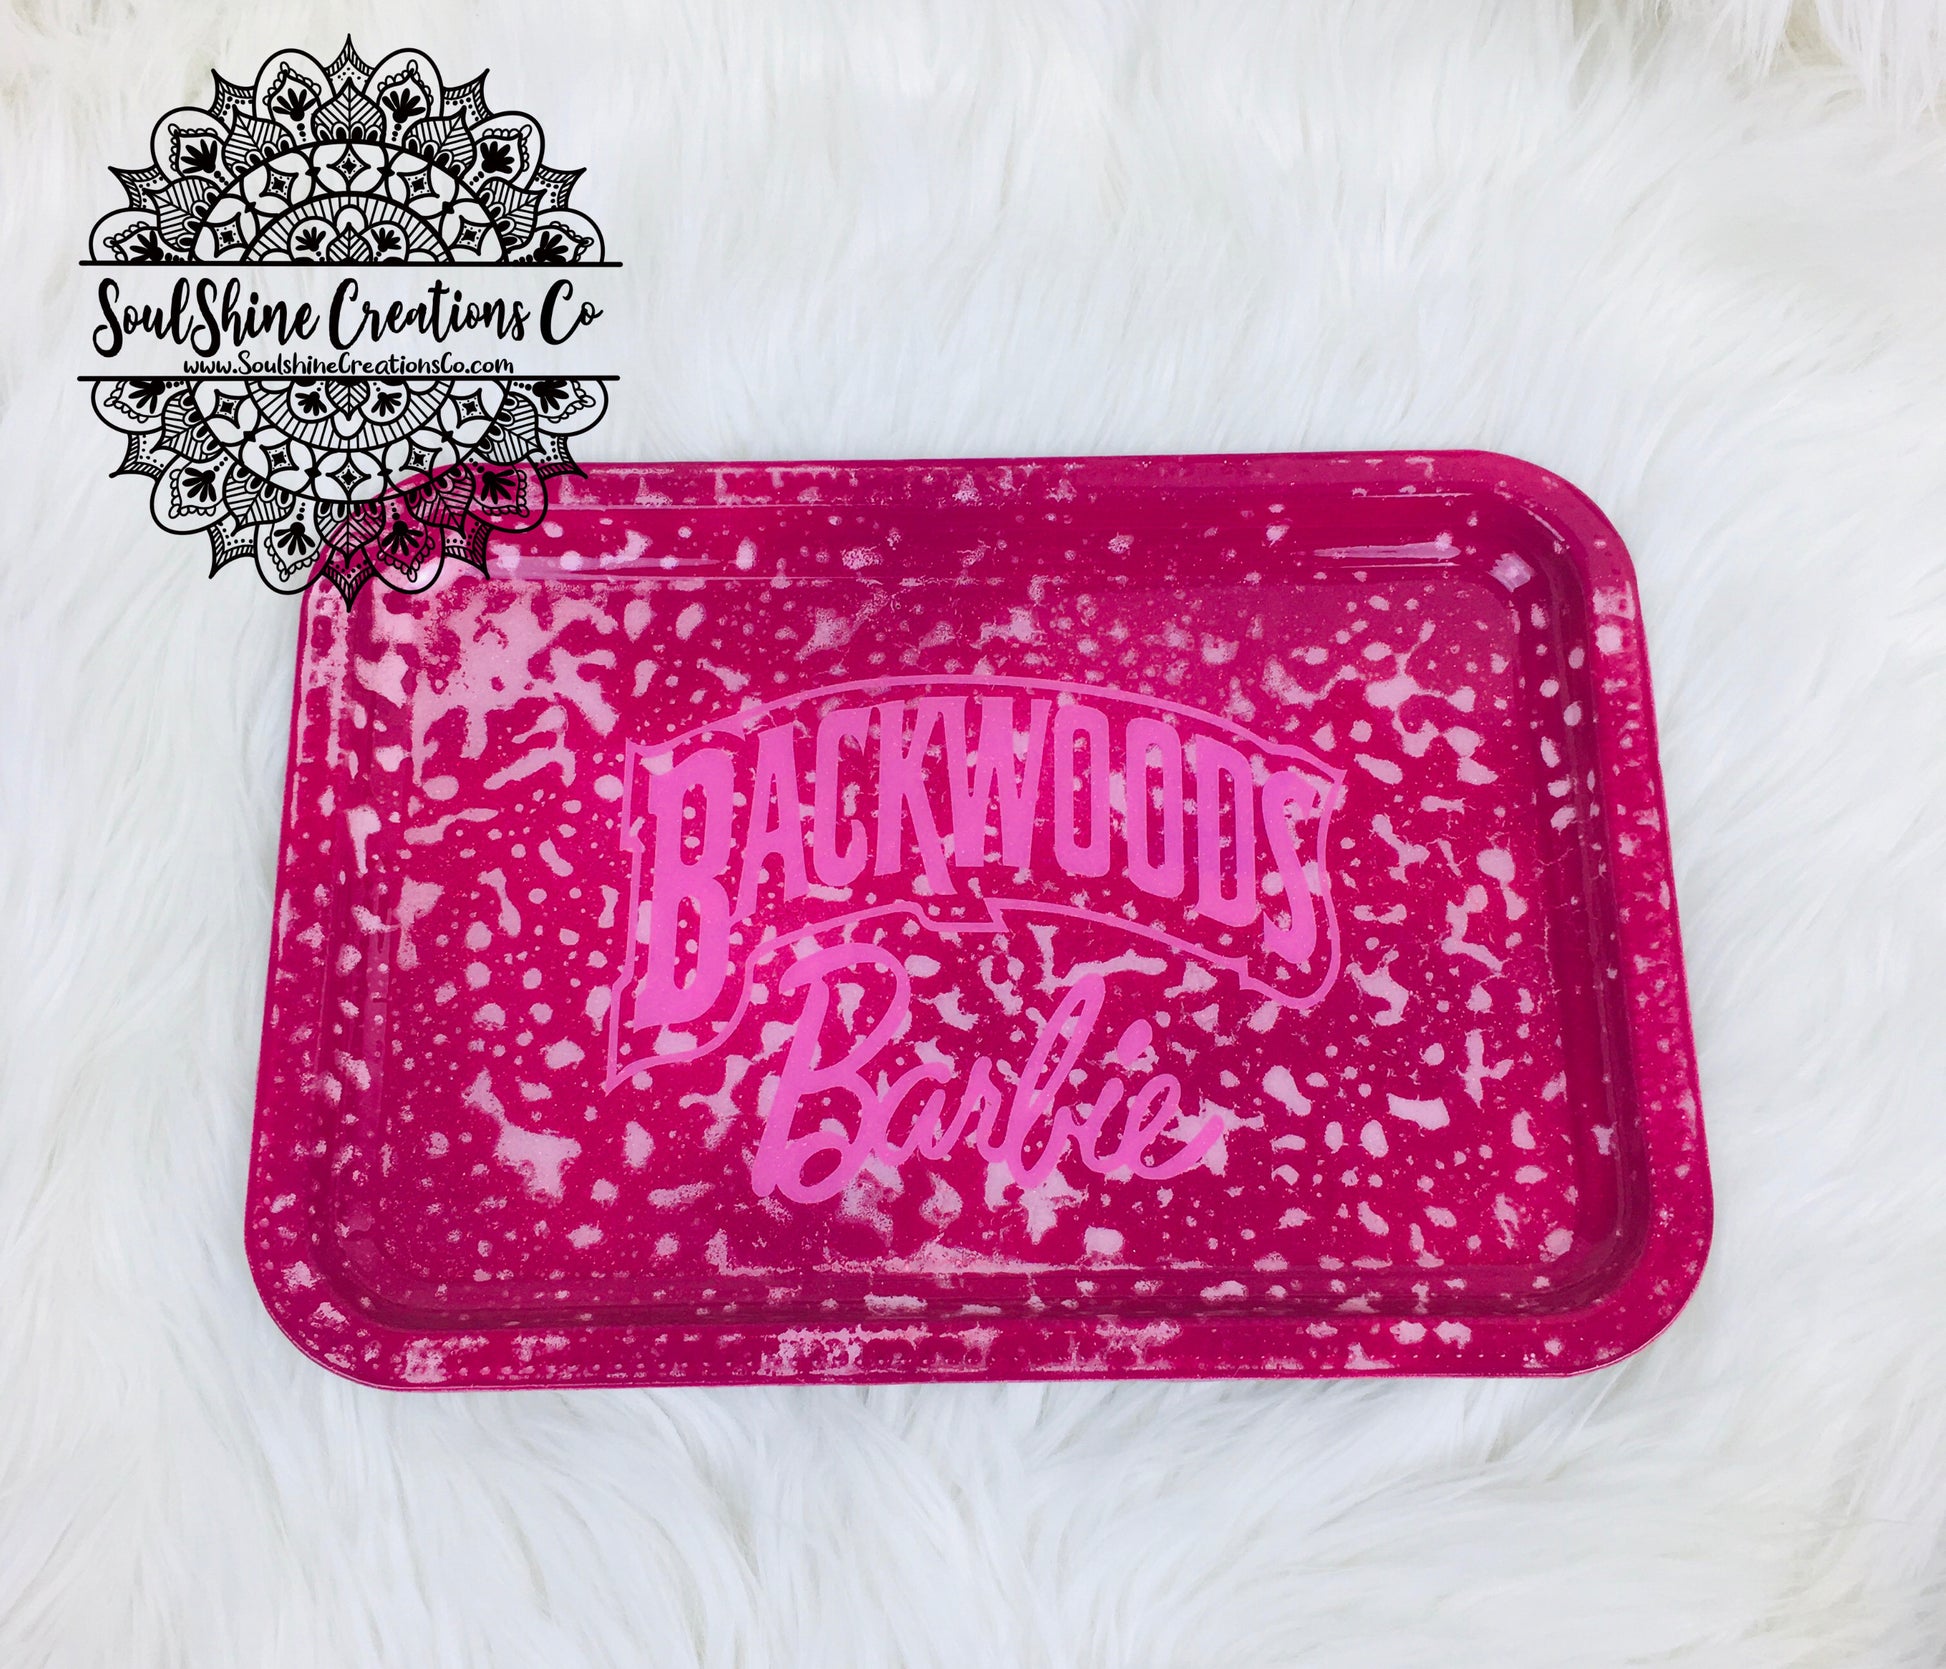 Rare glow-in-the-dark Barbie rolling tray set**Free Gift with Purchase**